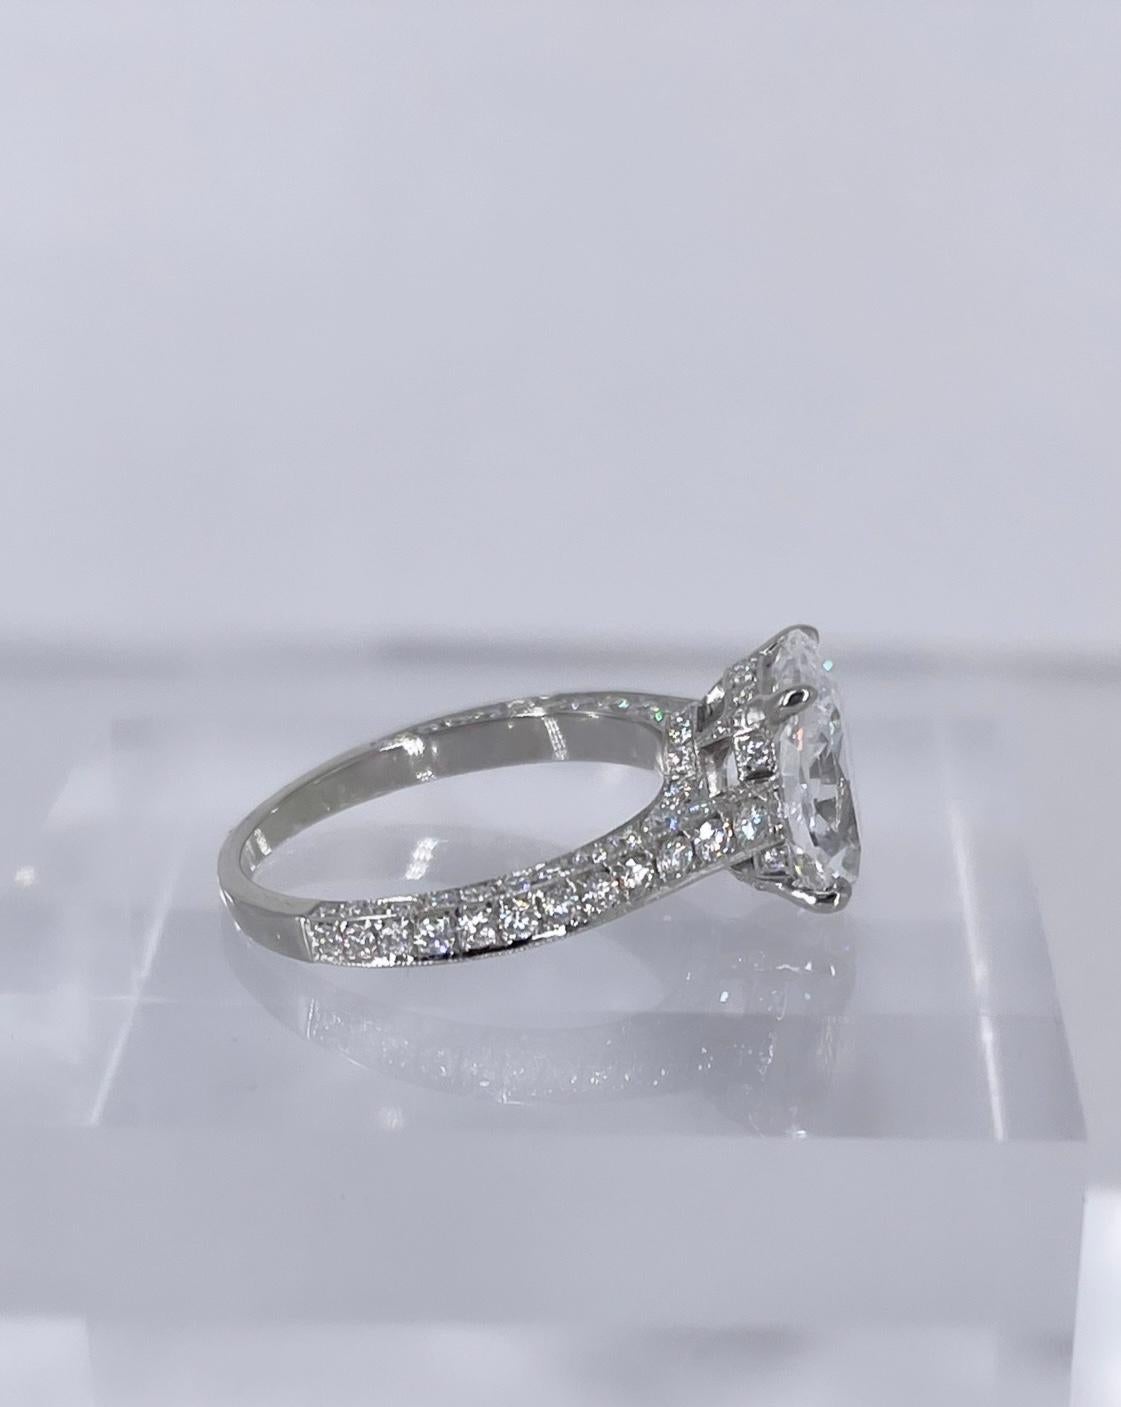 This engagement ring pairs an exceptional diamond with detailed craftsmanship. The stunning center diamond is a 3.18 carat cushion brilliant, certified by GIA to be D color and SI1 clarity. This is a very special and rare diamond; not only does it